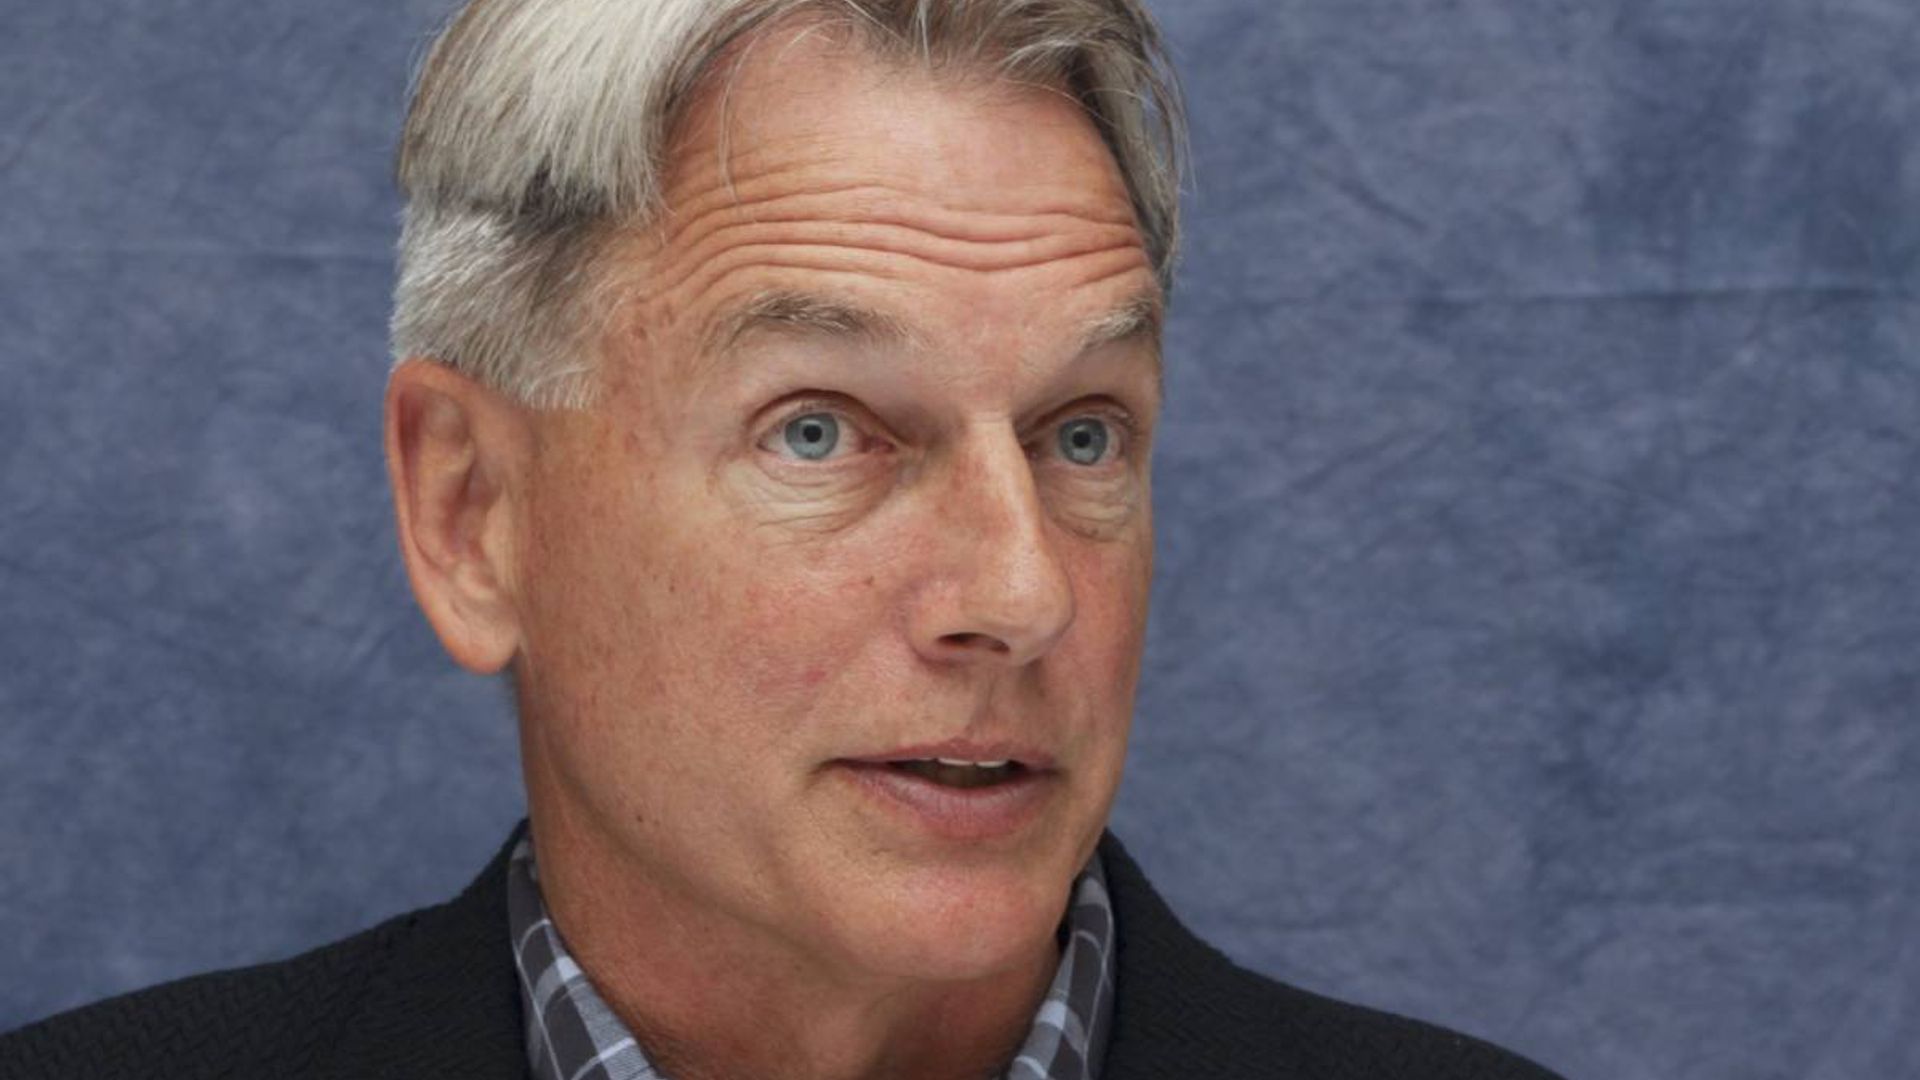 NCIS star Mark Harmon’s painful injury that resulted in a big change to his lifestyle – details